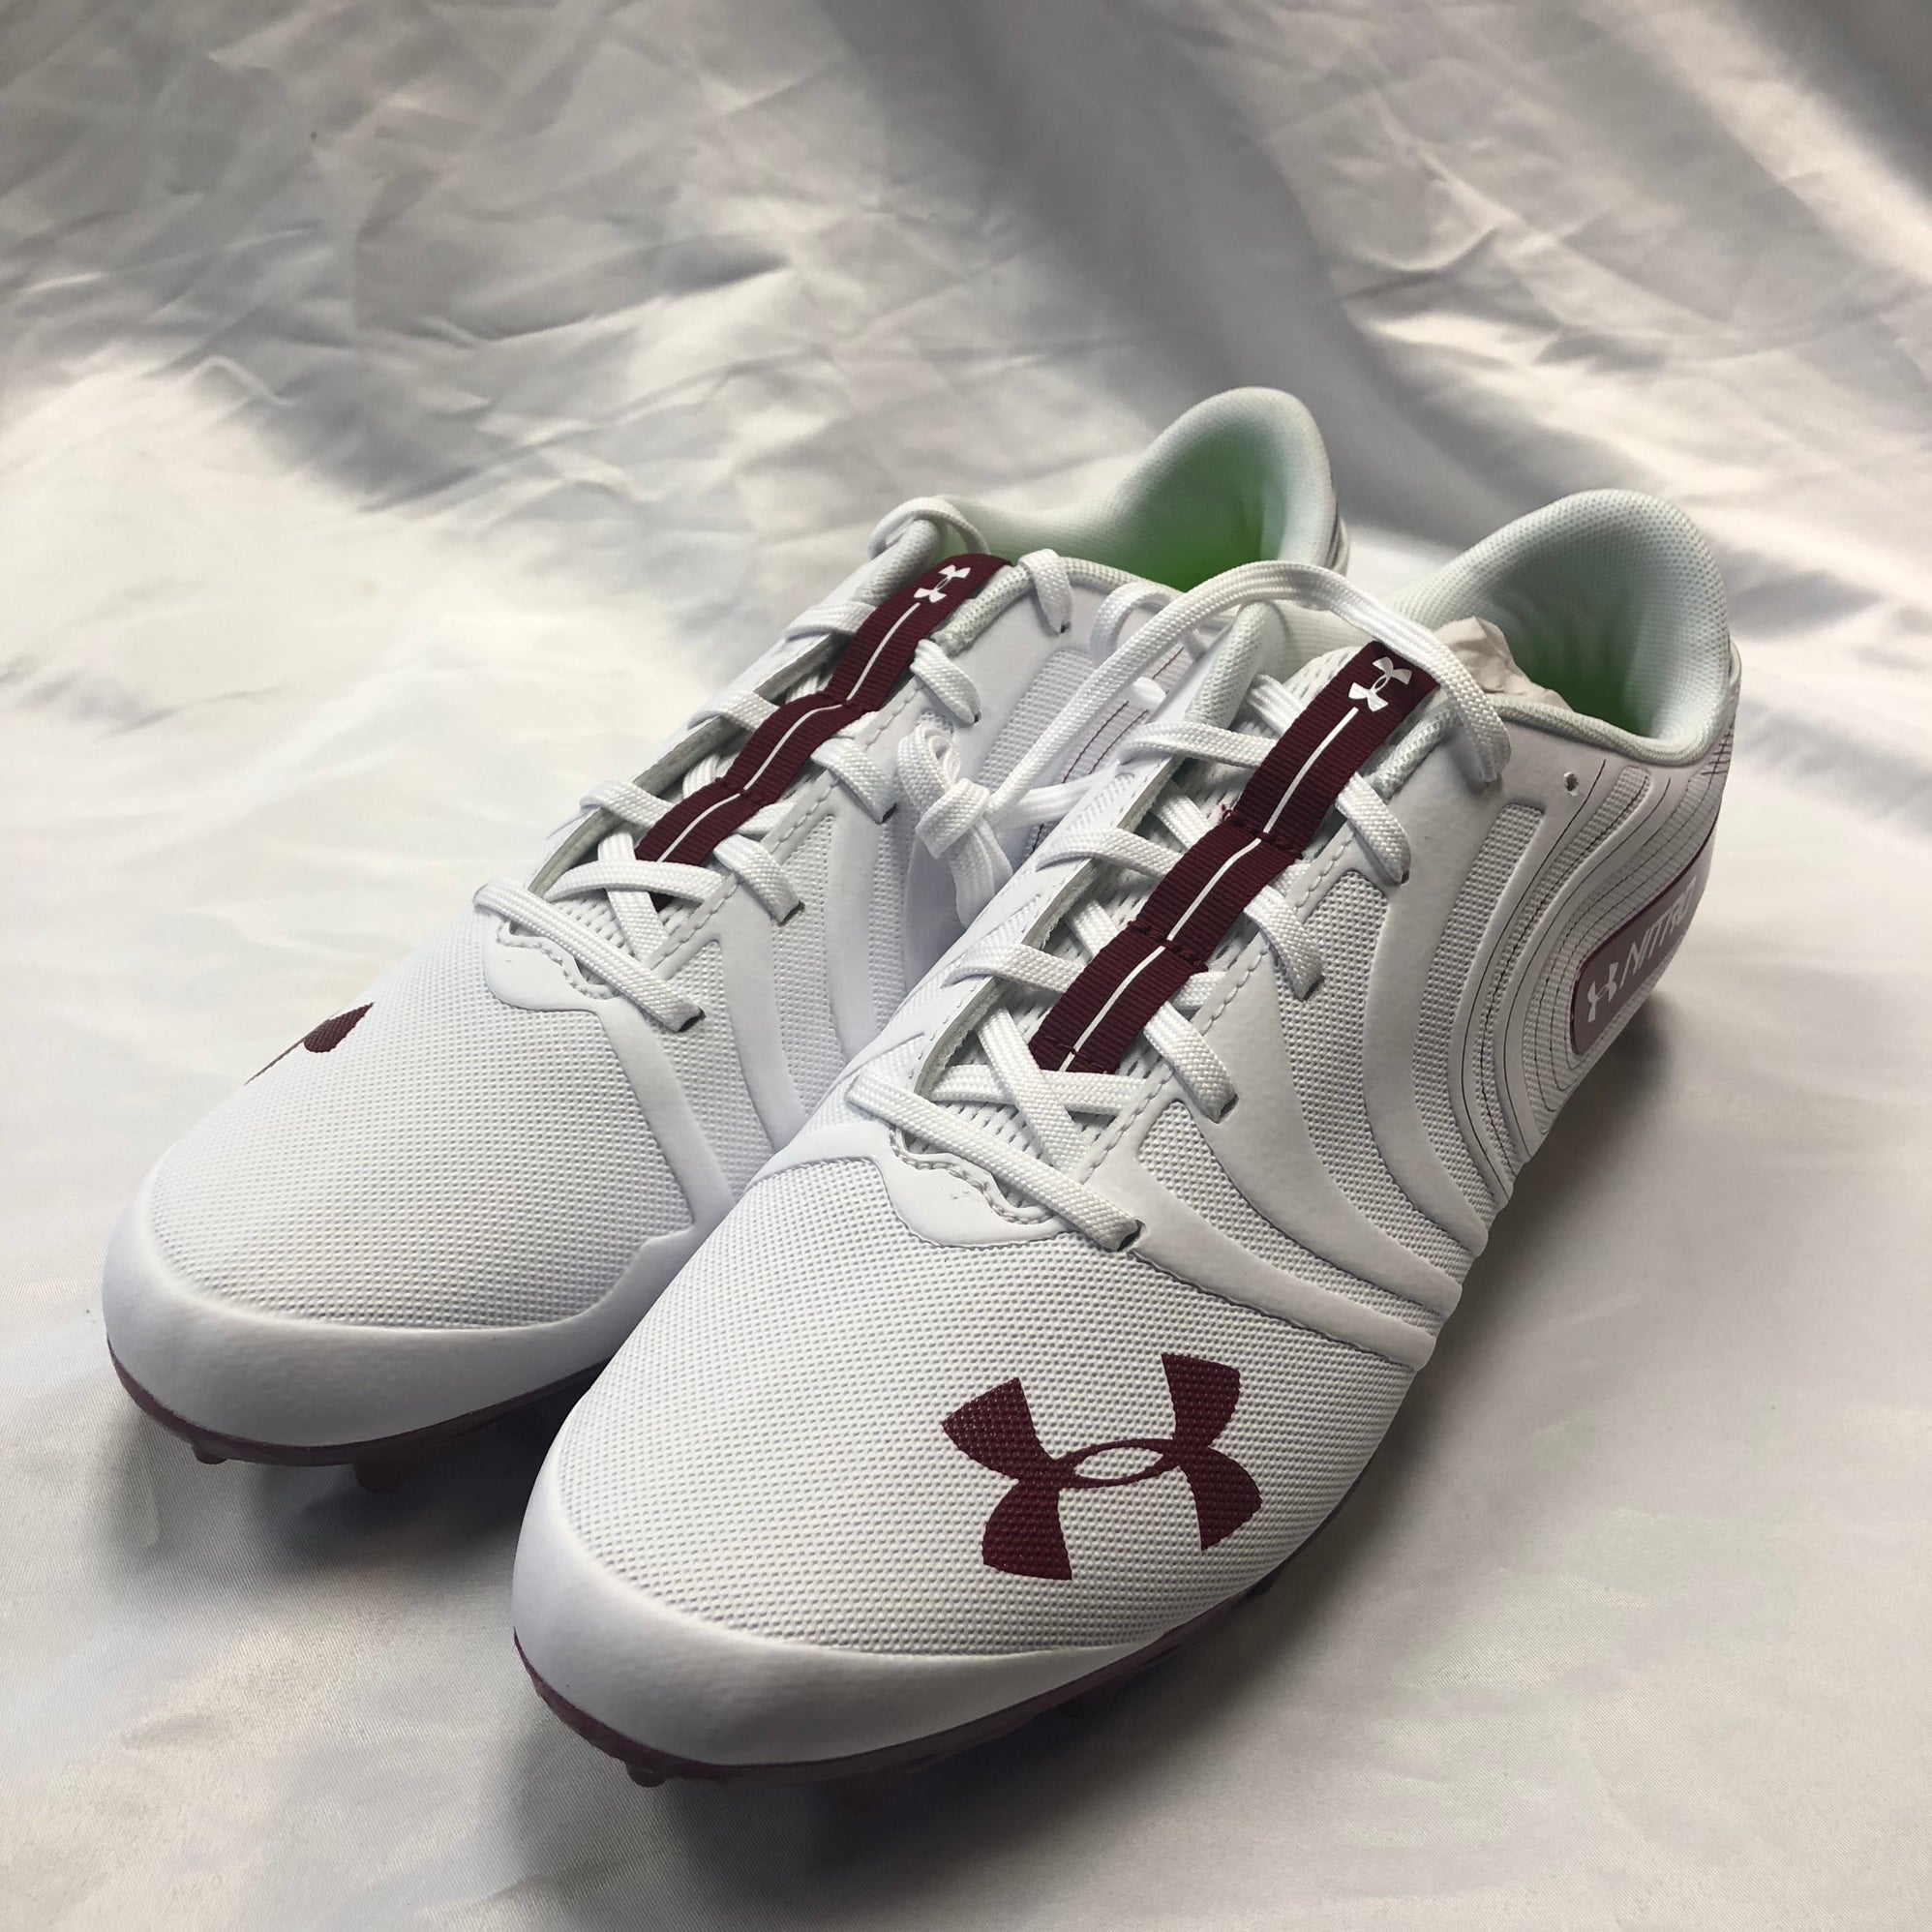 Under Armor Men's Football Cleats Team Nitro Low MC Red & White New In Box! 